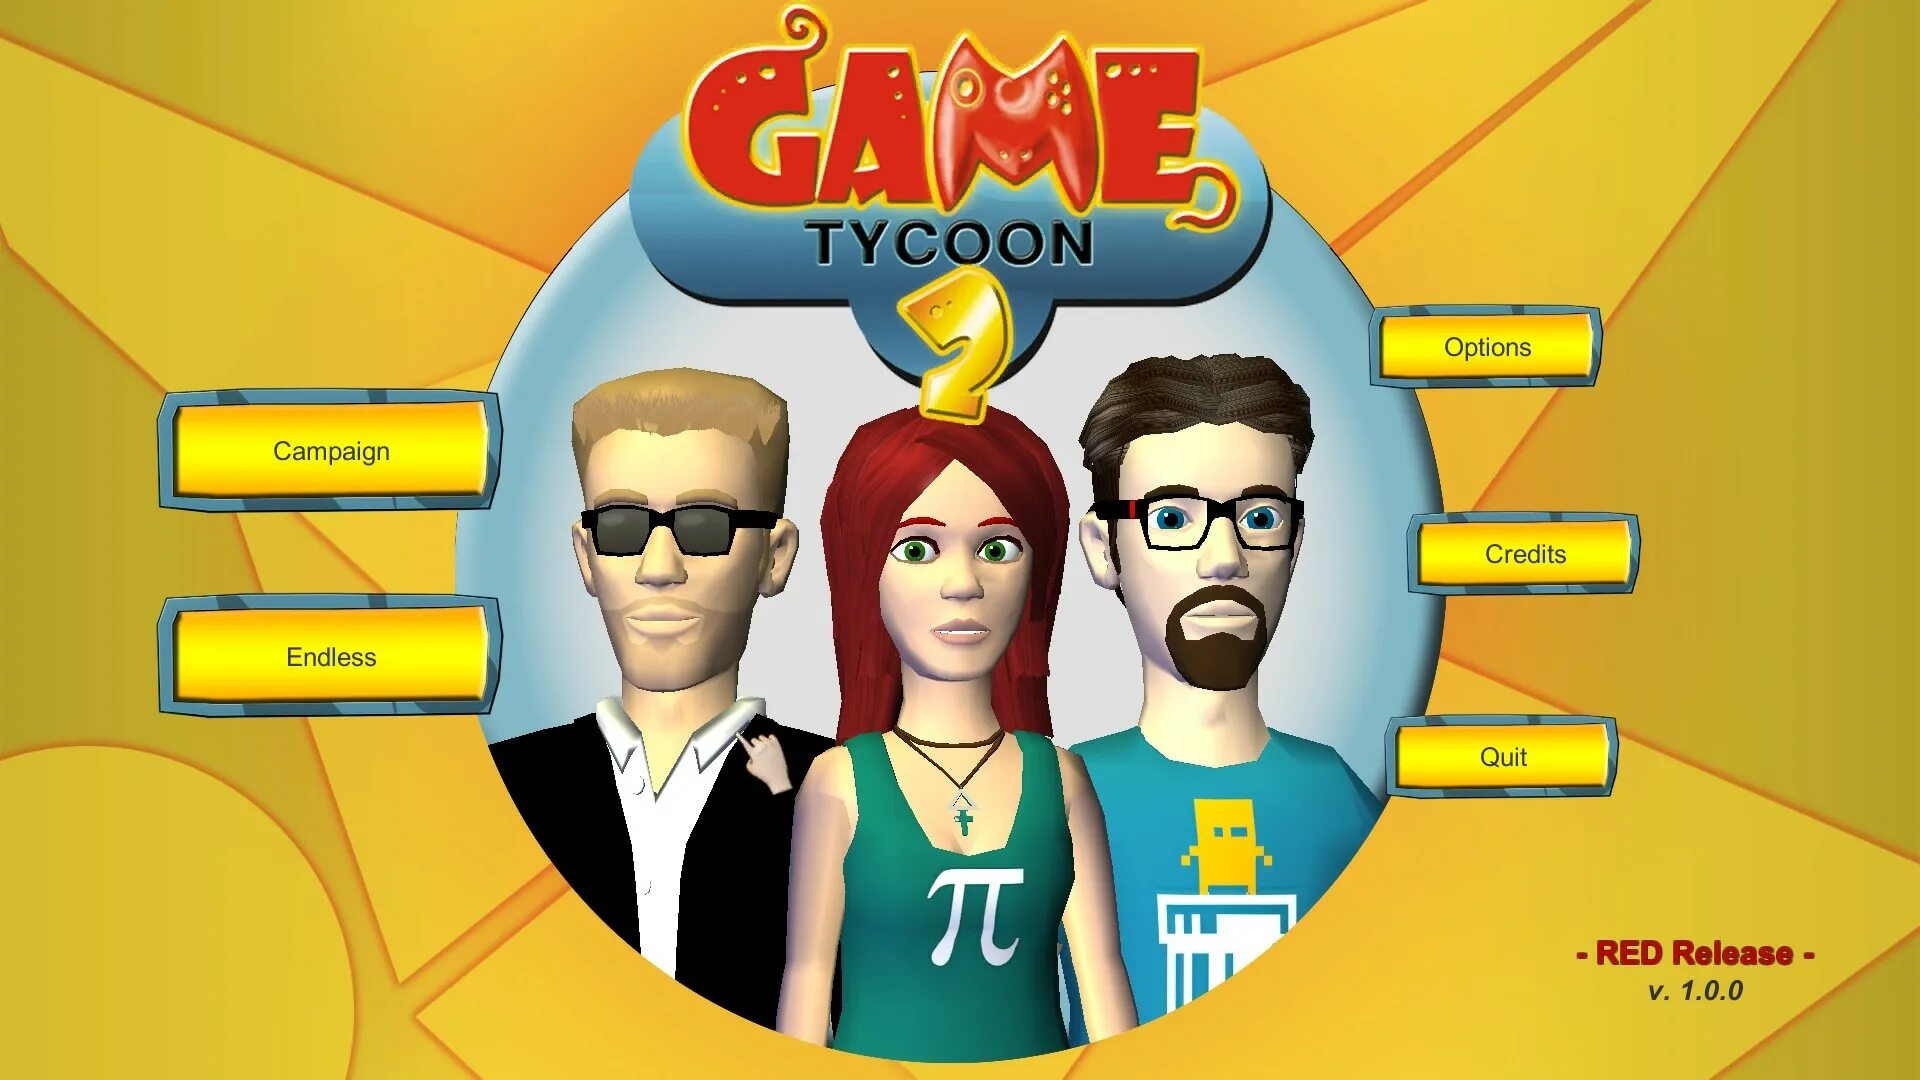 Tycoon игры. Tycoon 2. Game Dev Tycoon 2. Tycoon games Android. Игра game tycoon 2